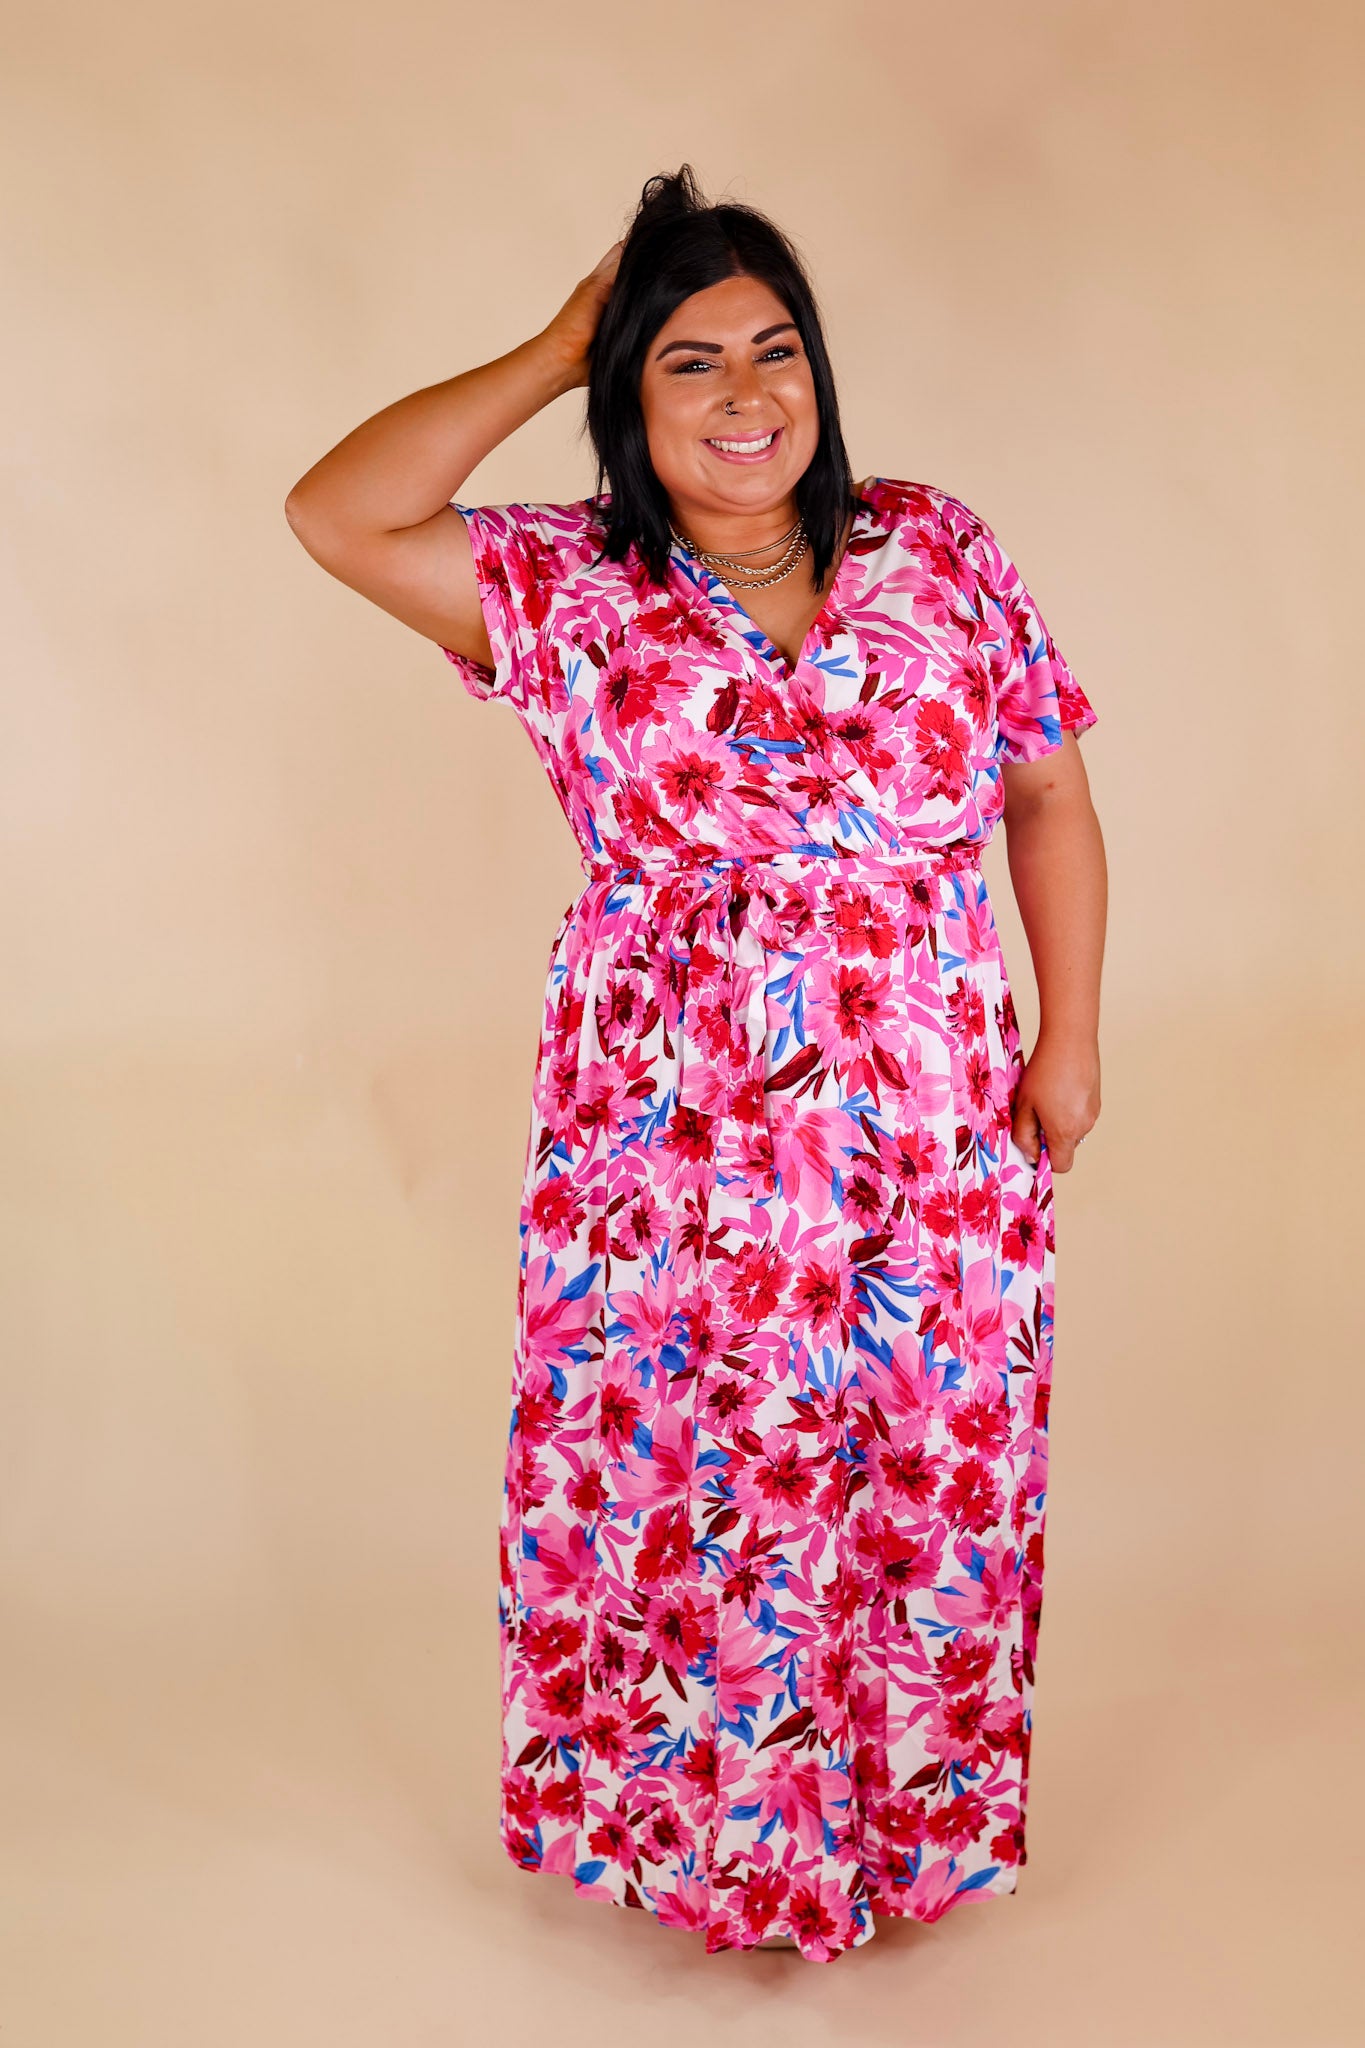 Delightful Dip Floral Maxi Dress with Waist Tie in Pink Mix - Giddy Up Glamour Boutique